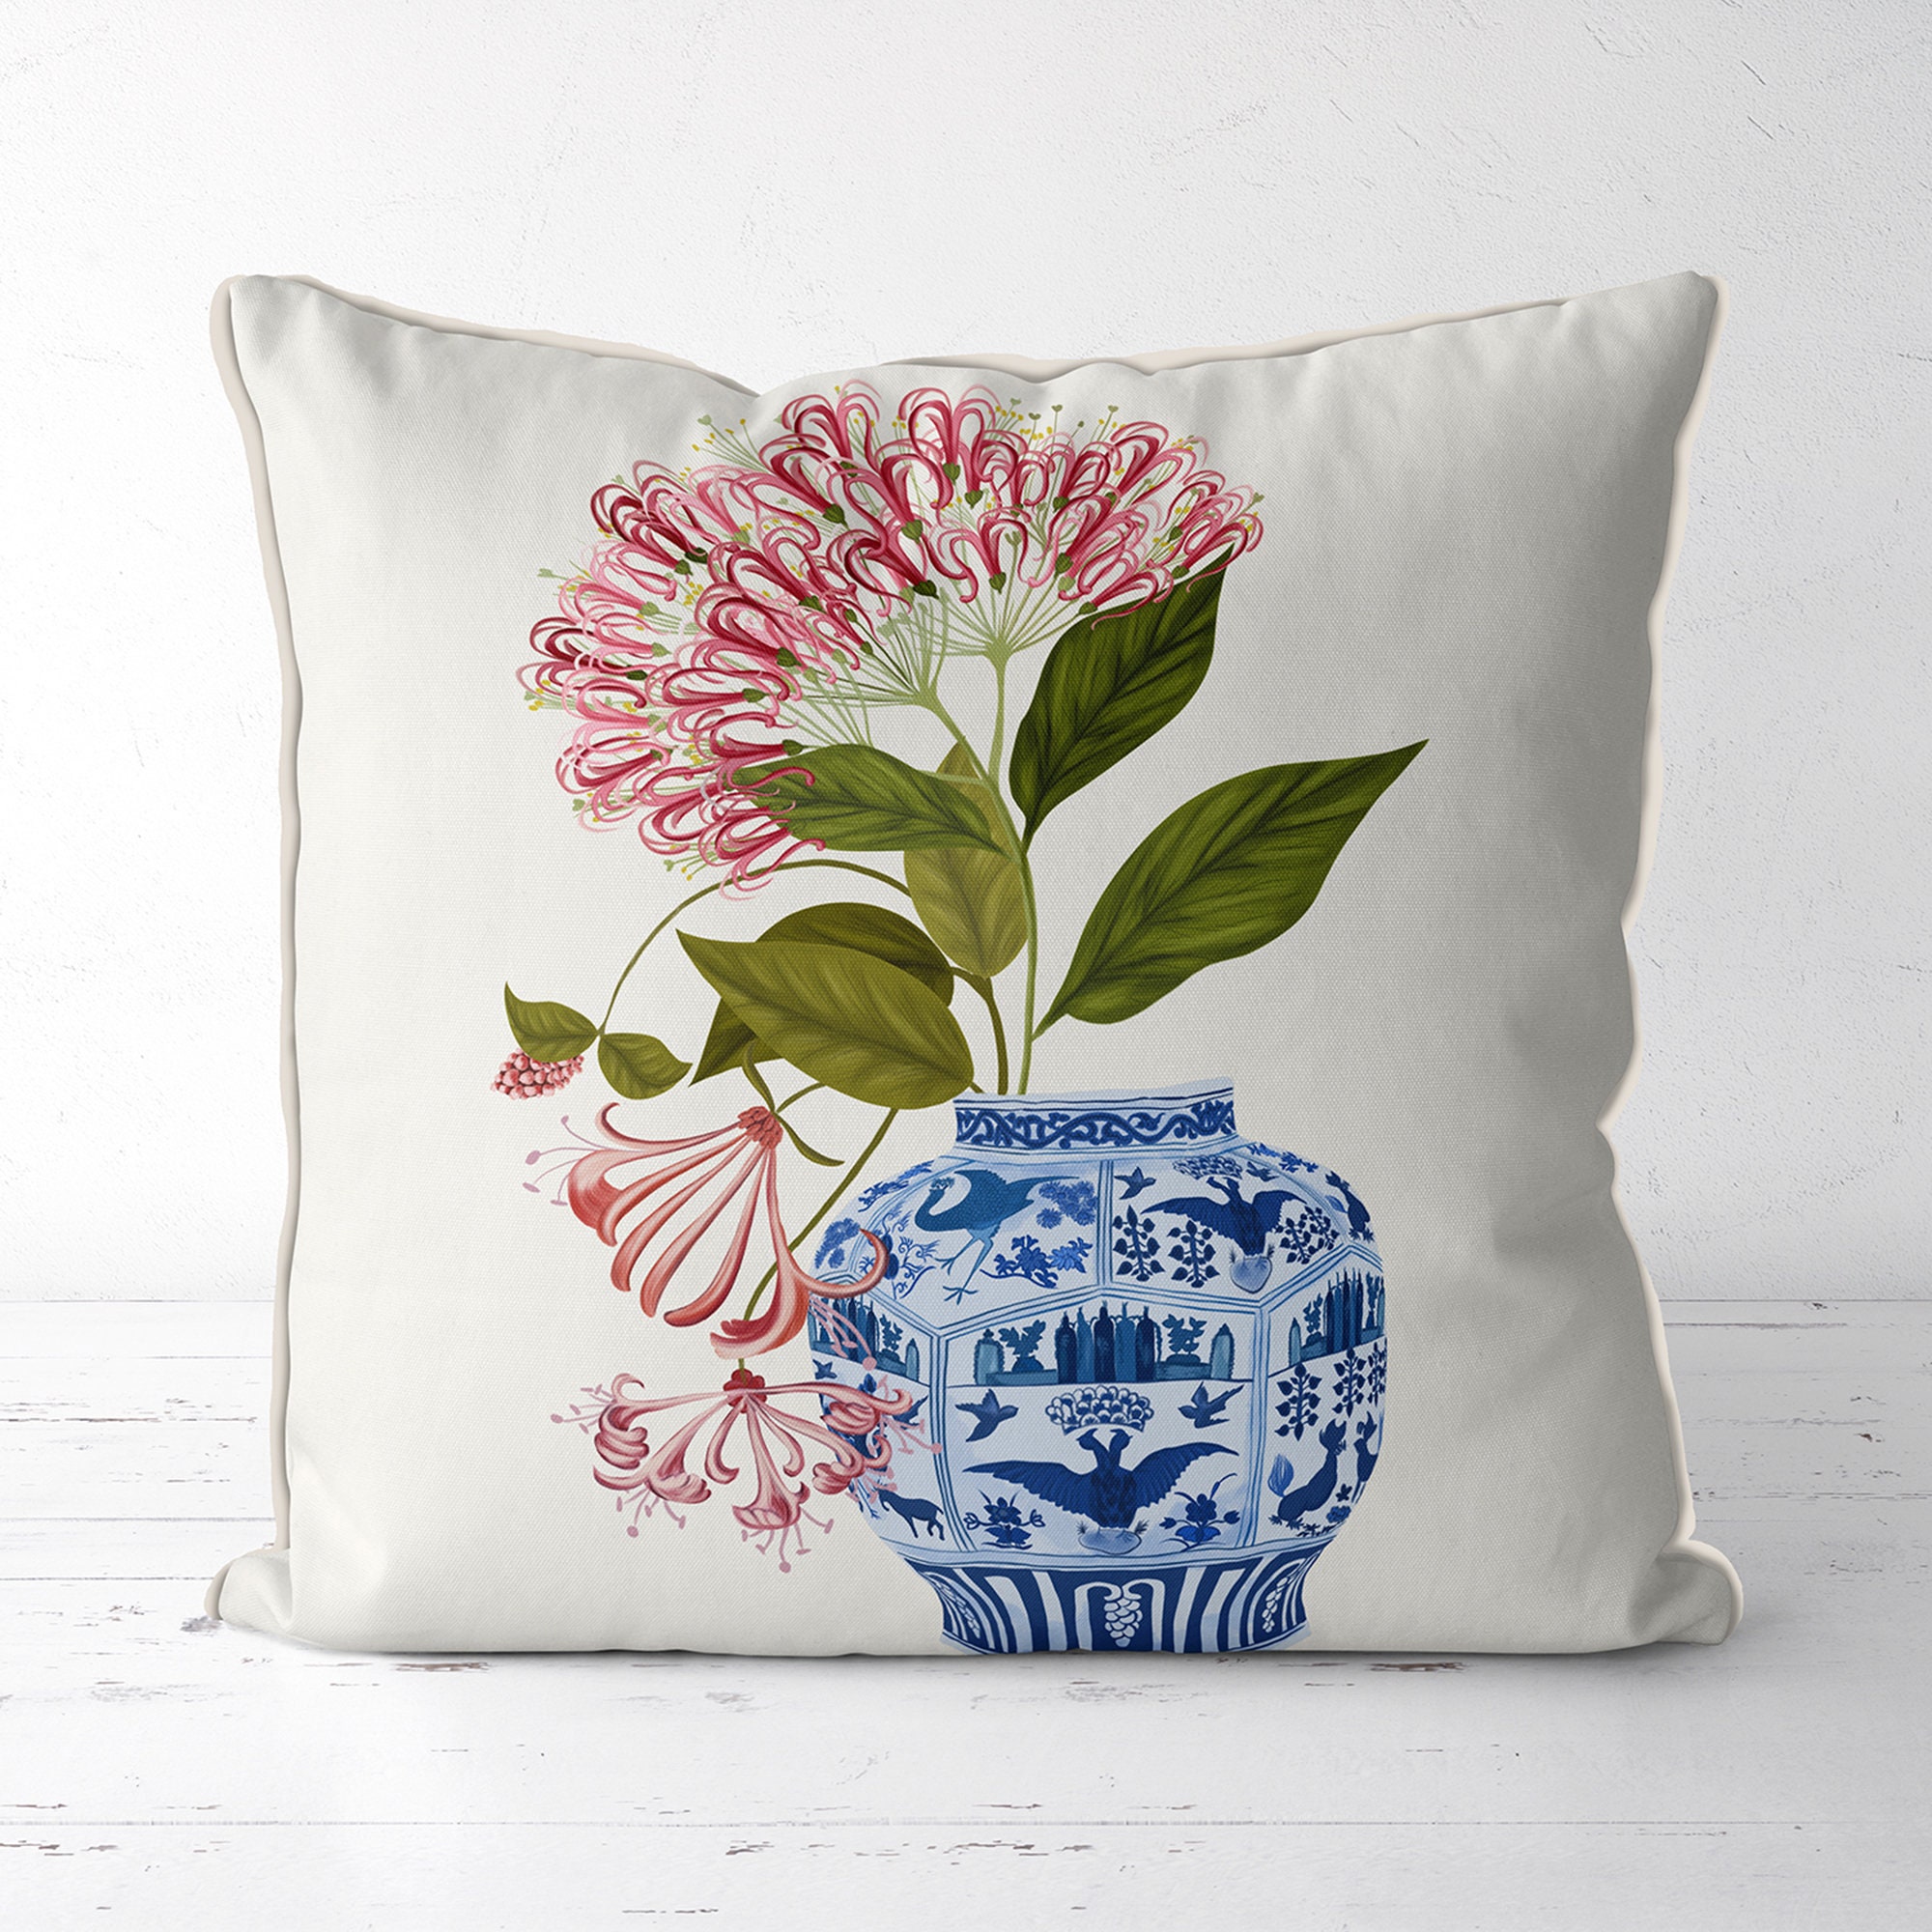  Neo Toile Pagodas in Coral Designer Lumbar Pillow Cover  Chinoiserie Pillows Asian Inspired Cushion Cover Rustic Decortaive  Pillowcase with Zipper Home decor 12x20 : Home & Kitchen